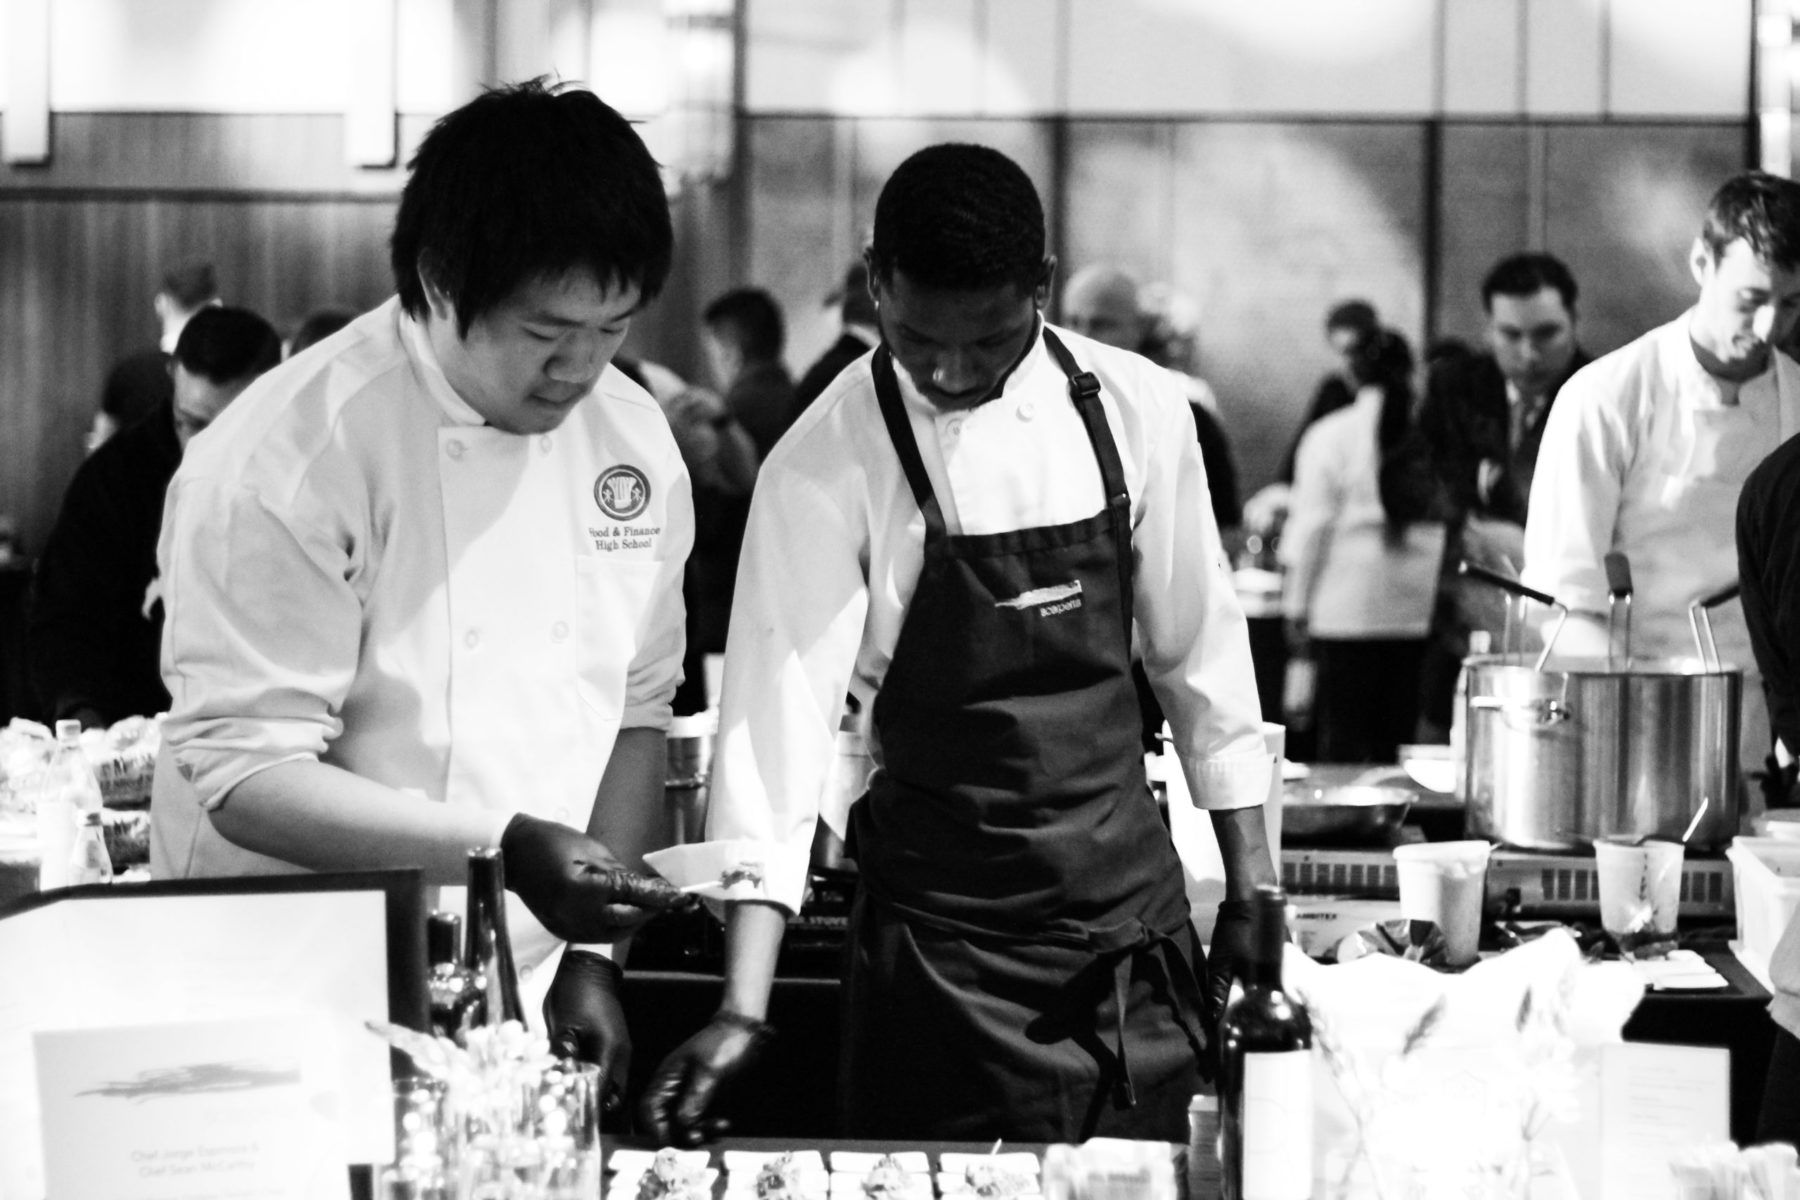 Charity event, two student cooking